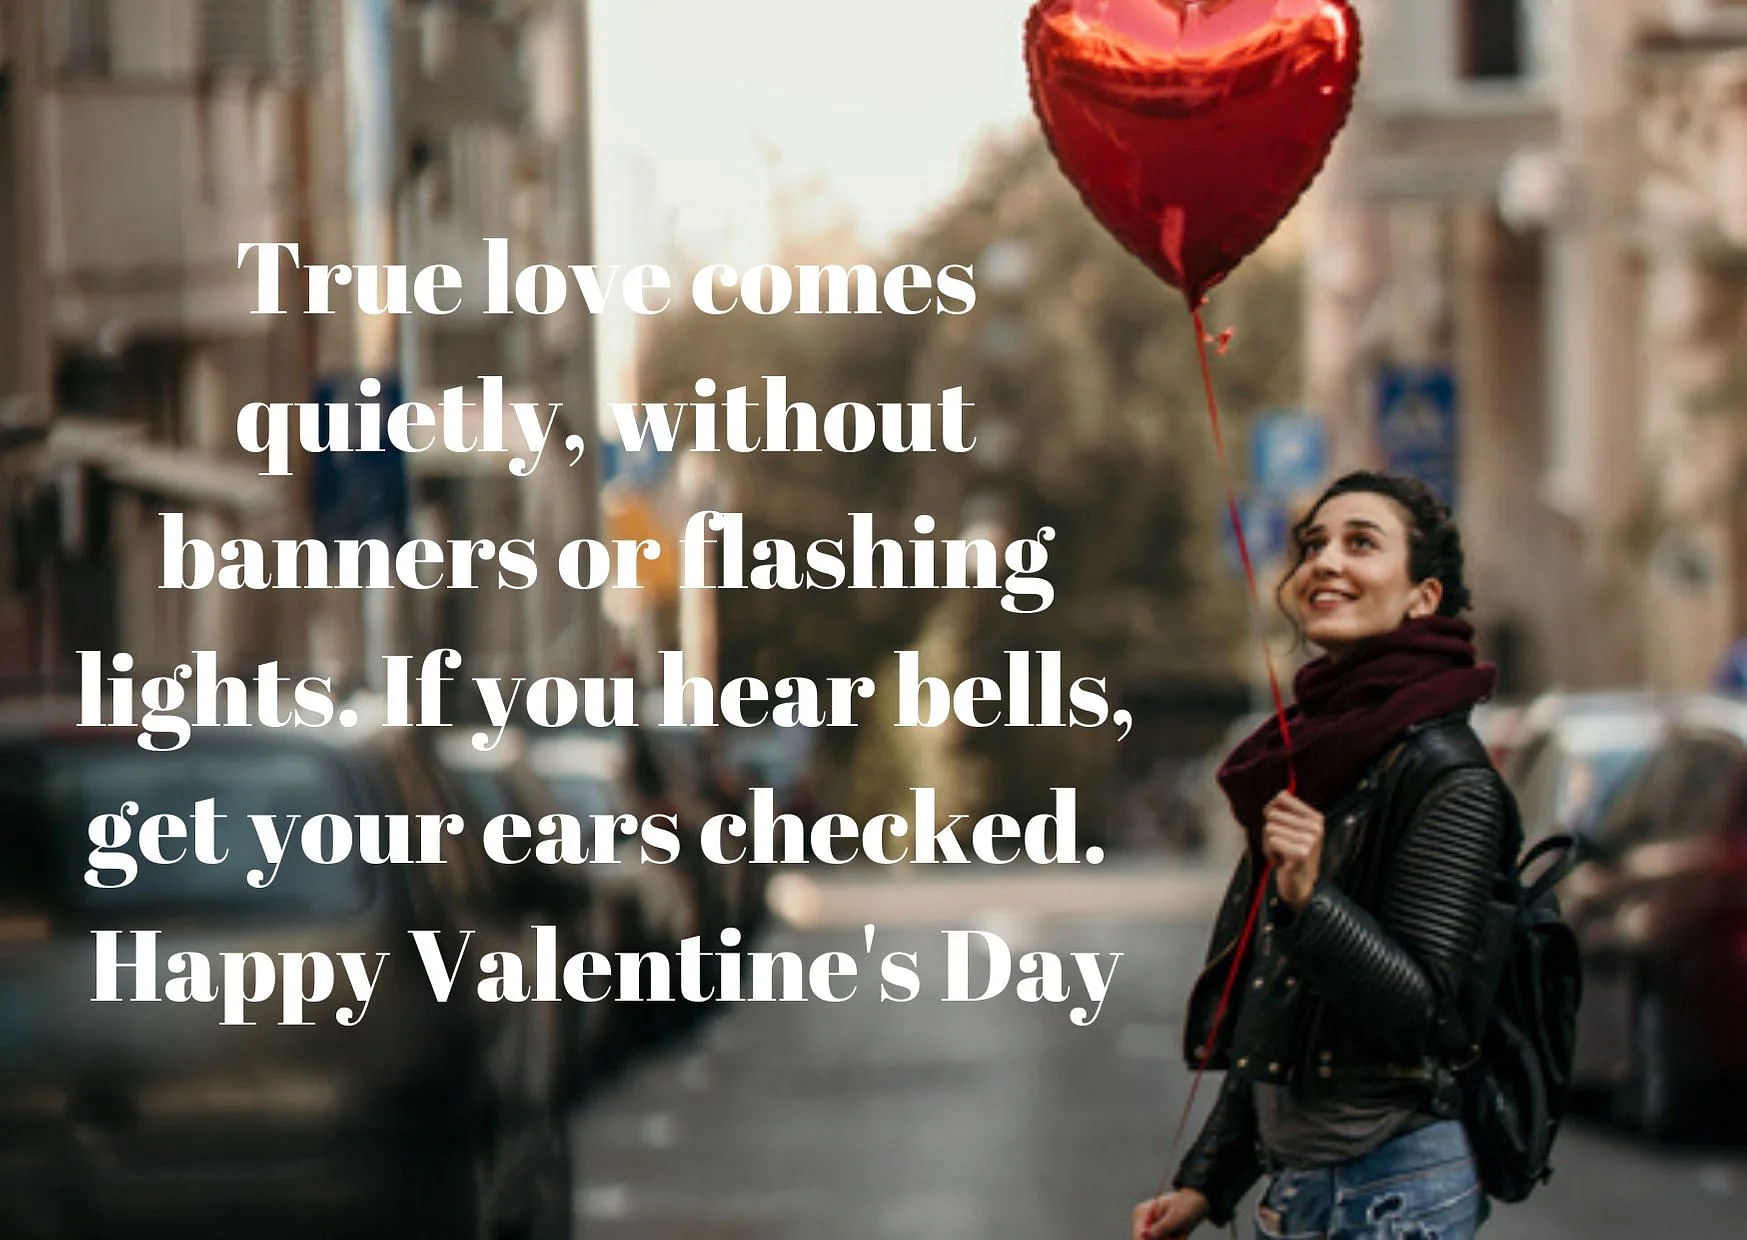 Happy Valentine's Day 2020 Quotes For Singles. Valentine Day Funny Memes,  Quotes, Images and Cards For Singles on valentine's day.